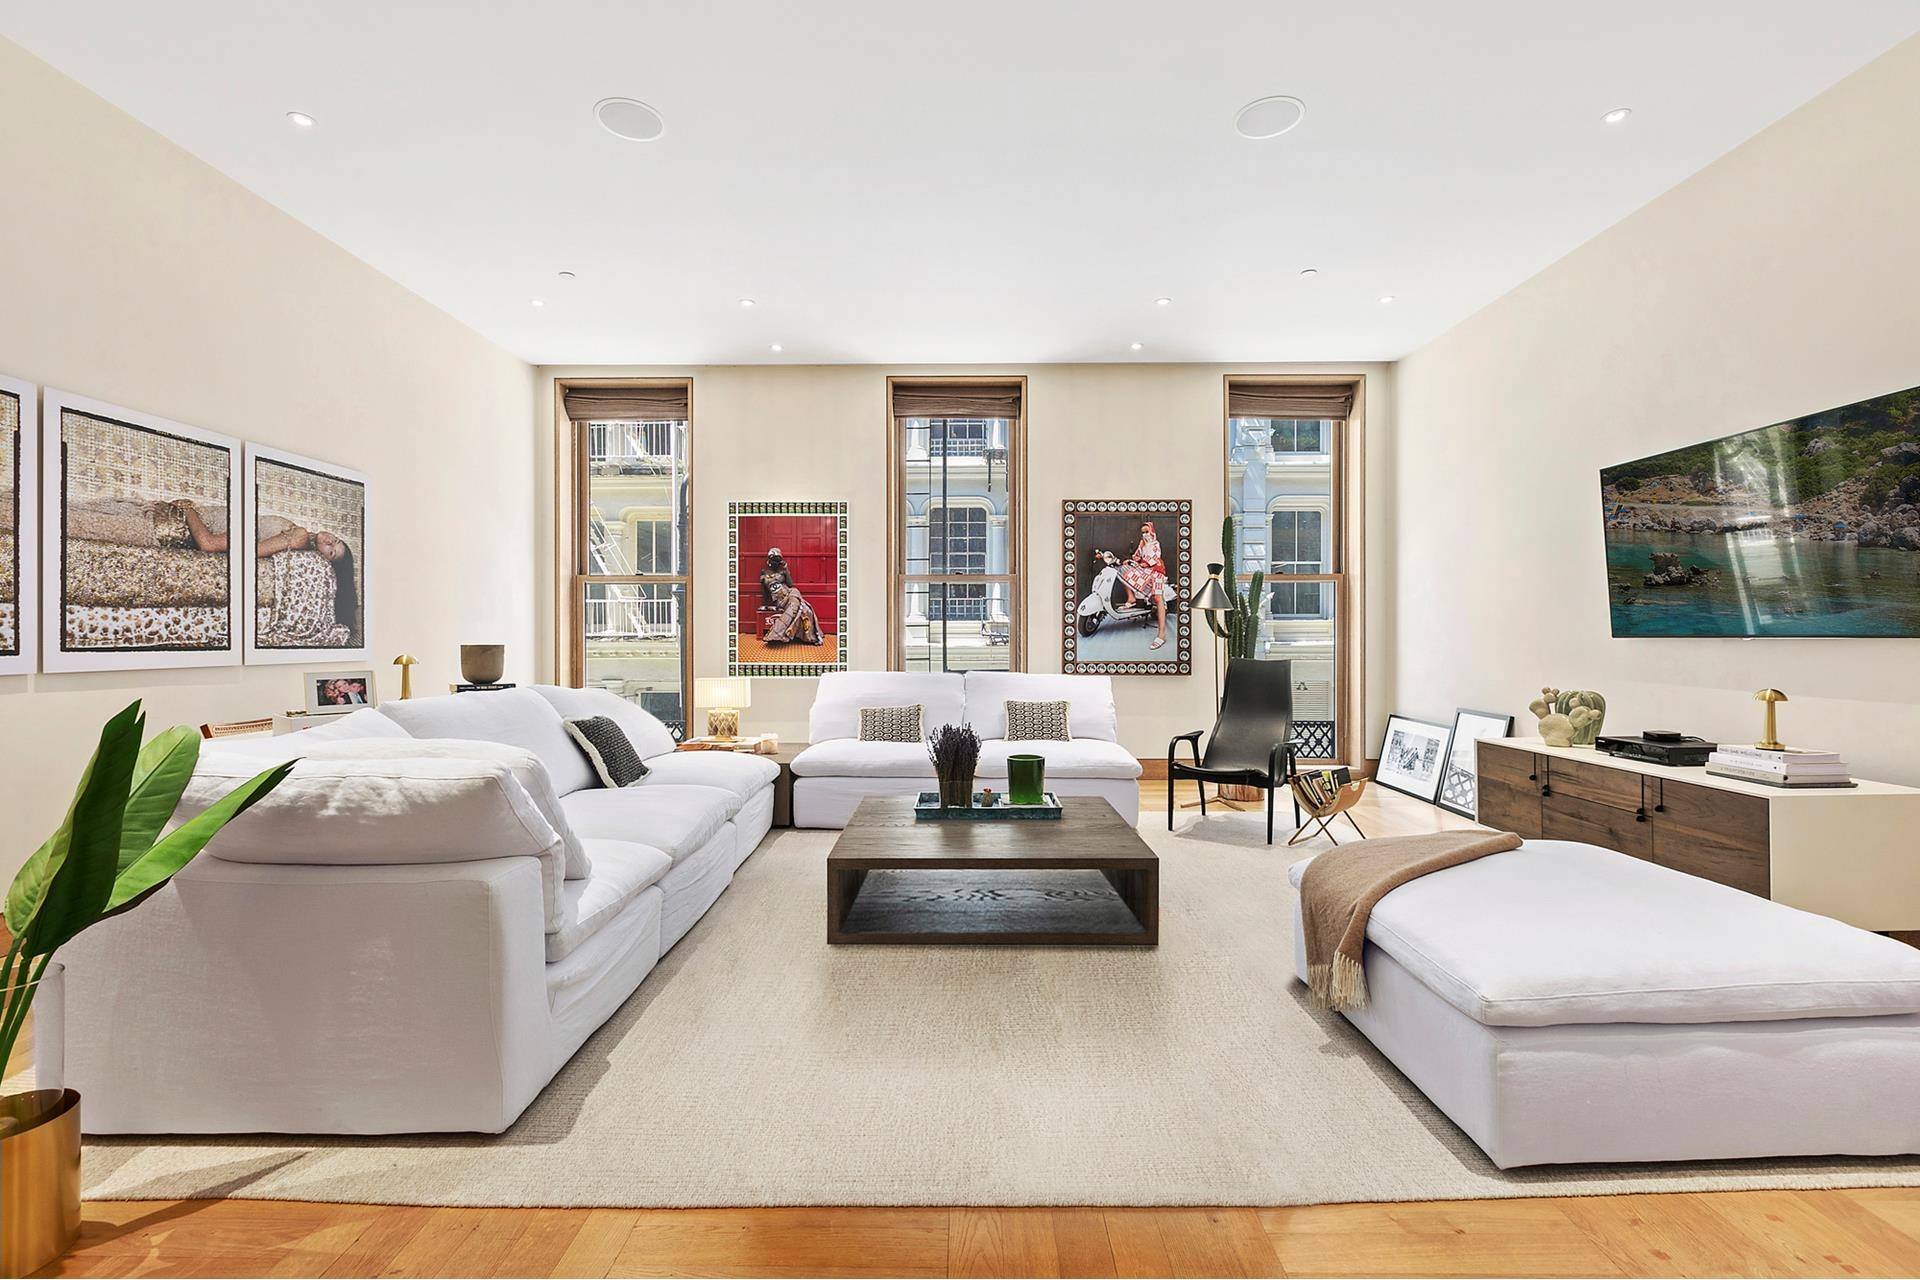 70 Greene Street, Residence 2 Offered furnished for 17, 500 M Located in the heart of Soho's Historic Cast Iron District, this modern and sleek loft offers the perfect balance ...